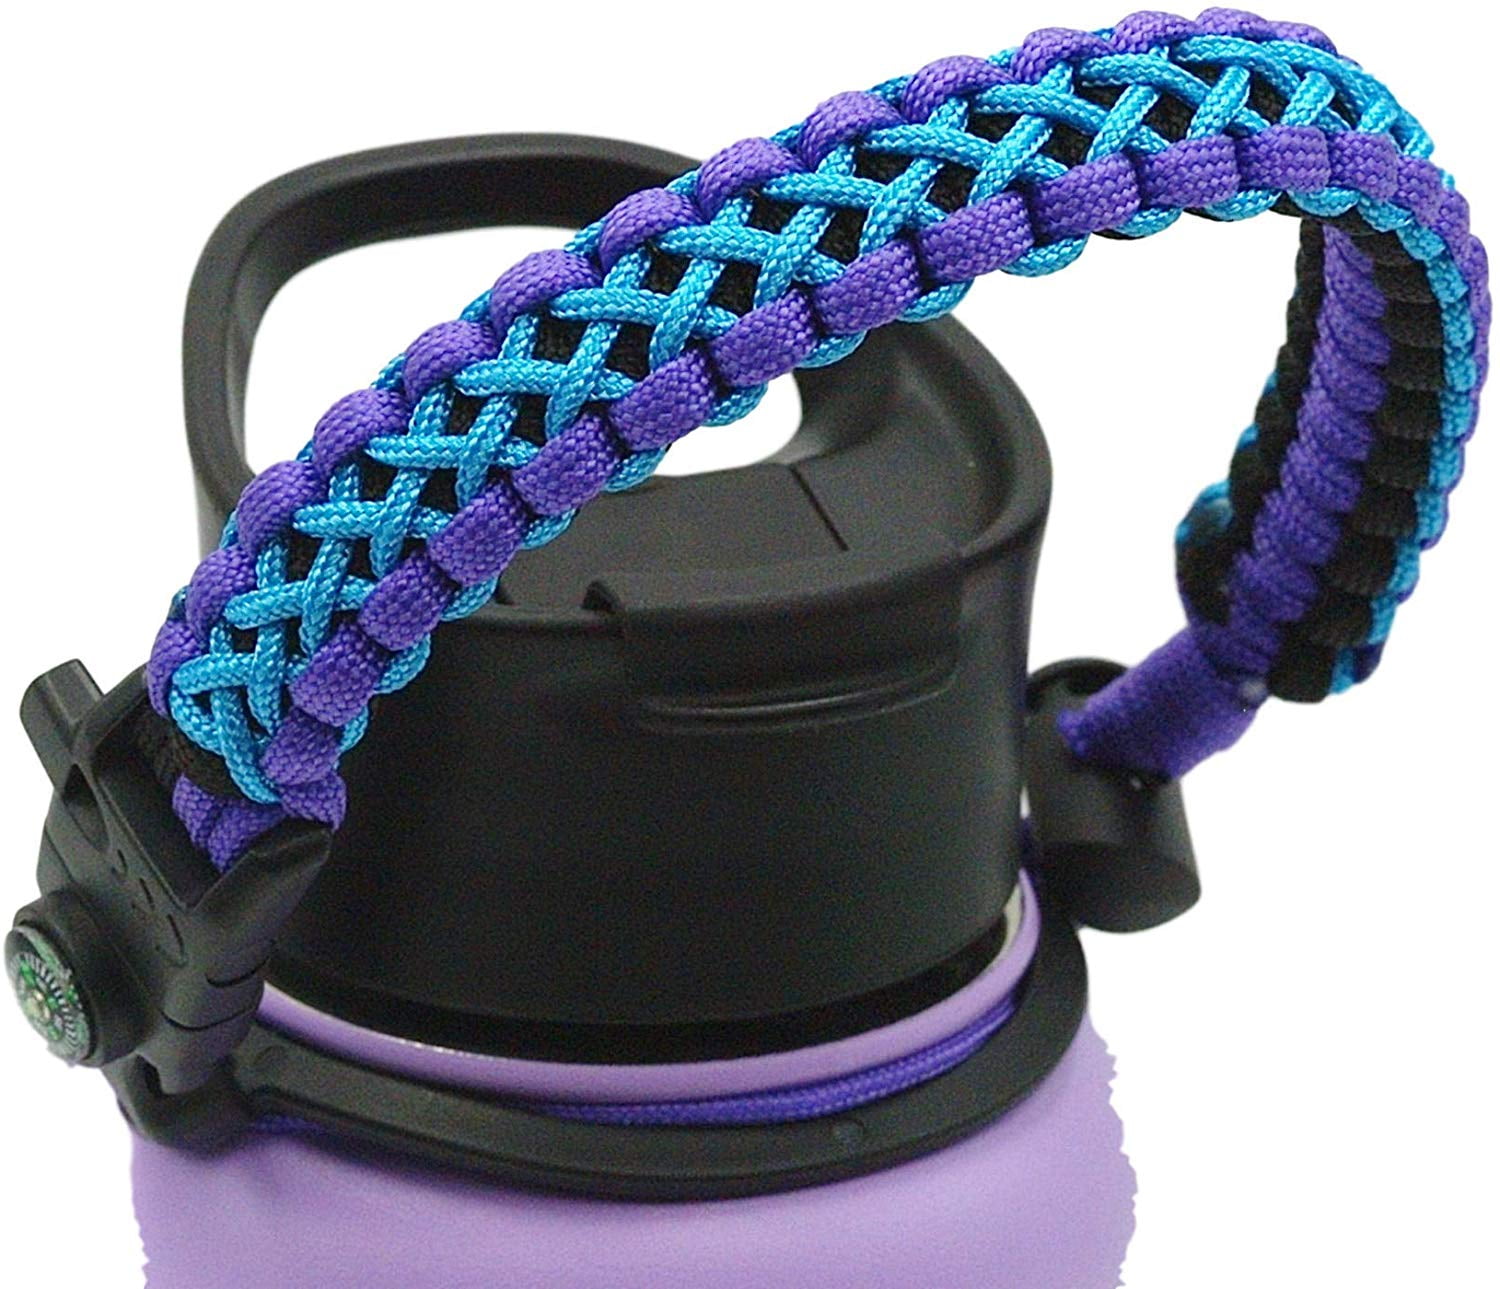  Wongeto Paracord Handle Carrier Holder with Shoulder Strap,Compatible  with Hydro Flask Wide Mouth Water Bottles 12oz - 64 oz for Walking Hiking  Camping (ArmyGreen) : Sports & Outdoors